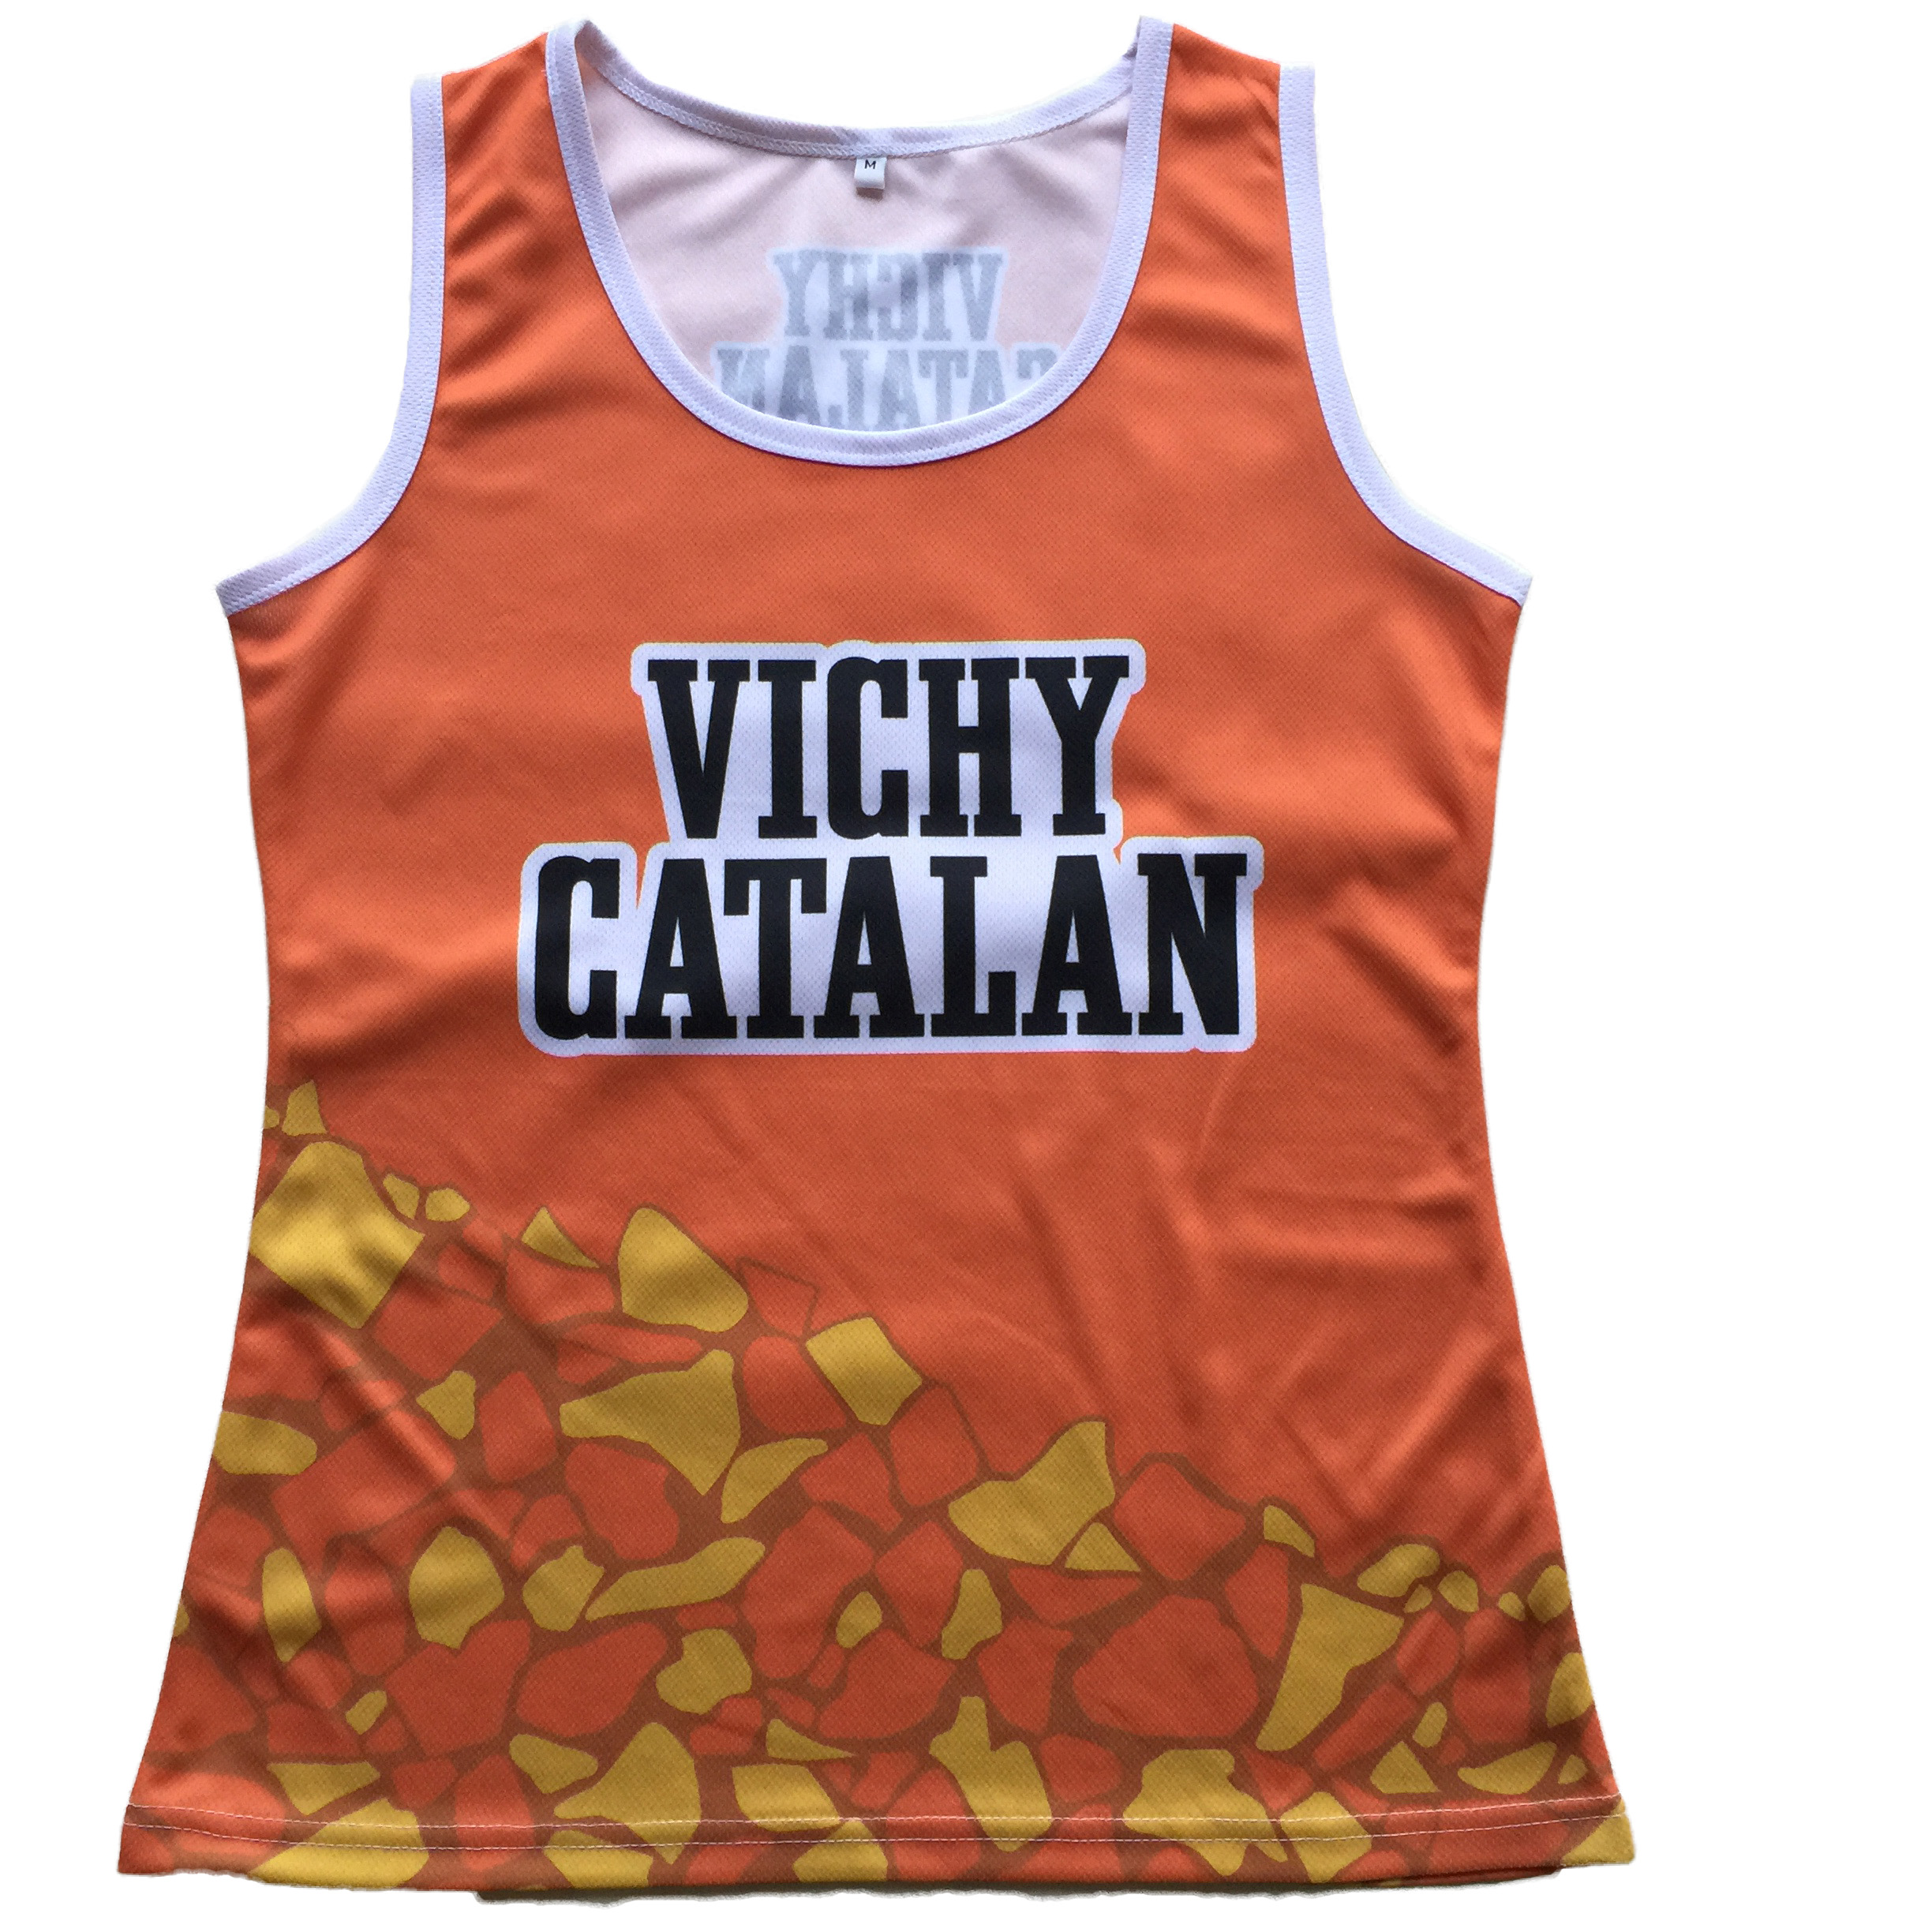 100% polyester all over sublimation printed tank top sport breathable wicking sleeveless t-shirt for ladies and women